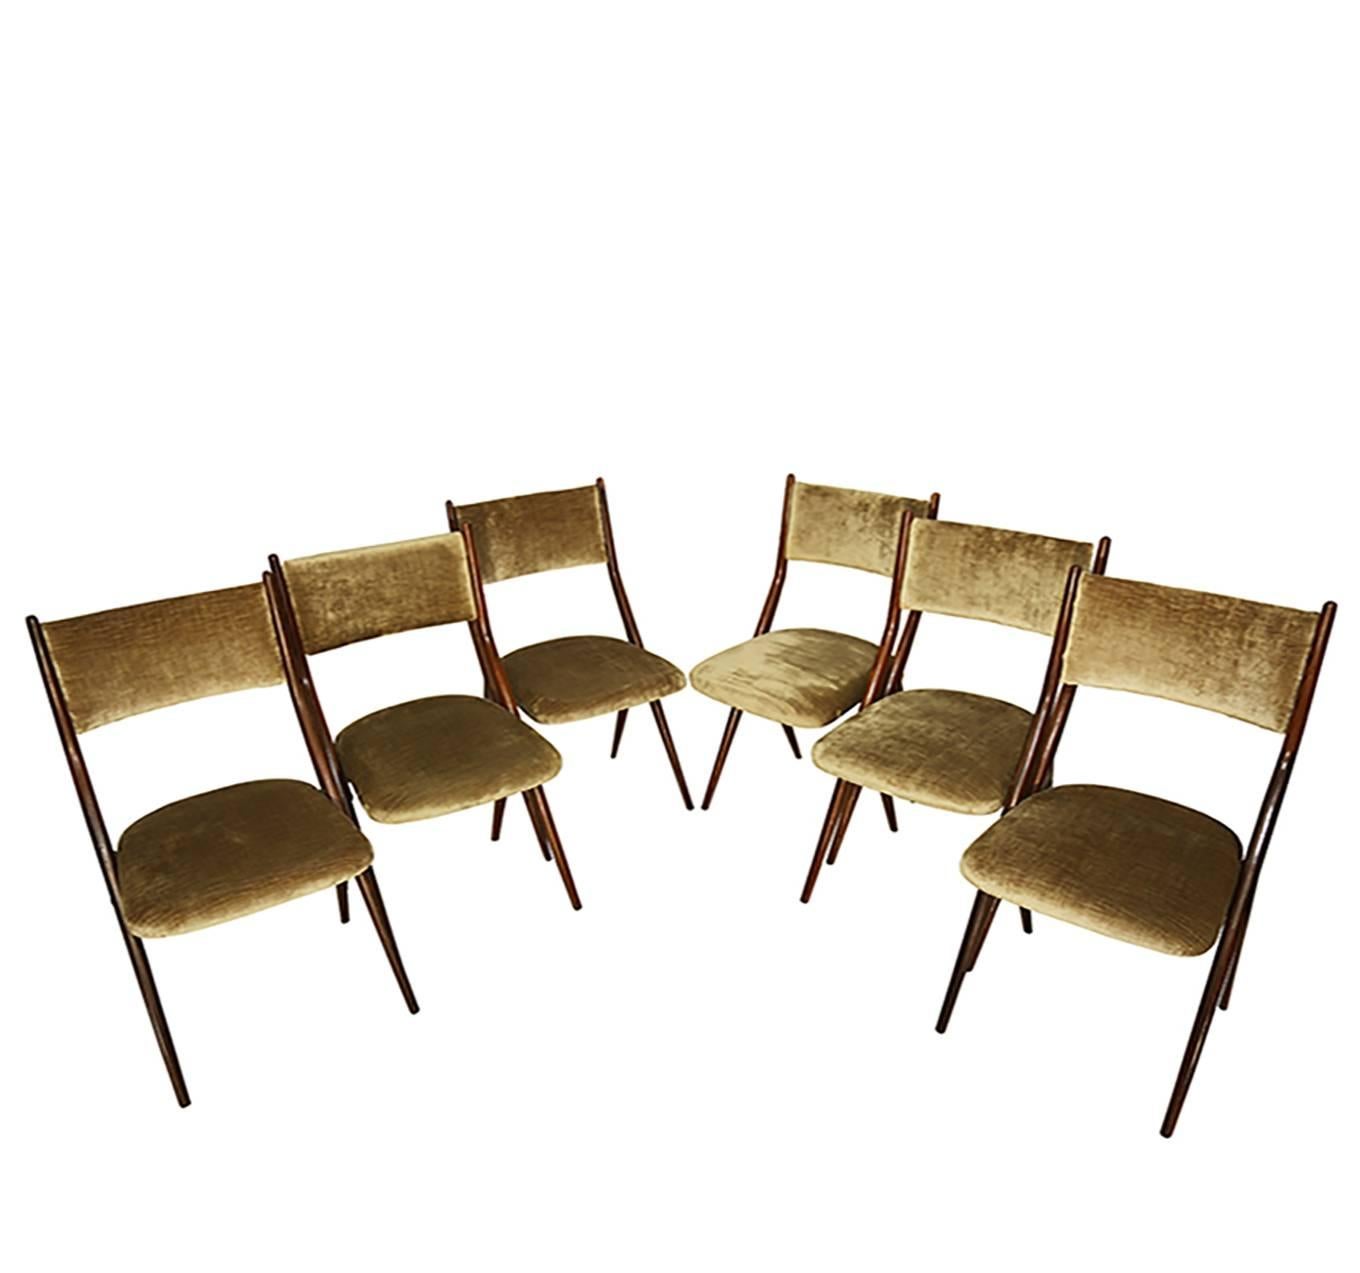 Chic sculptural scissor shape dining chairs. Mahogany frames with taupe color velvet upholstery. They are in excellent condition.